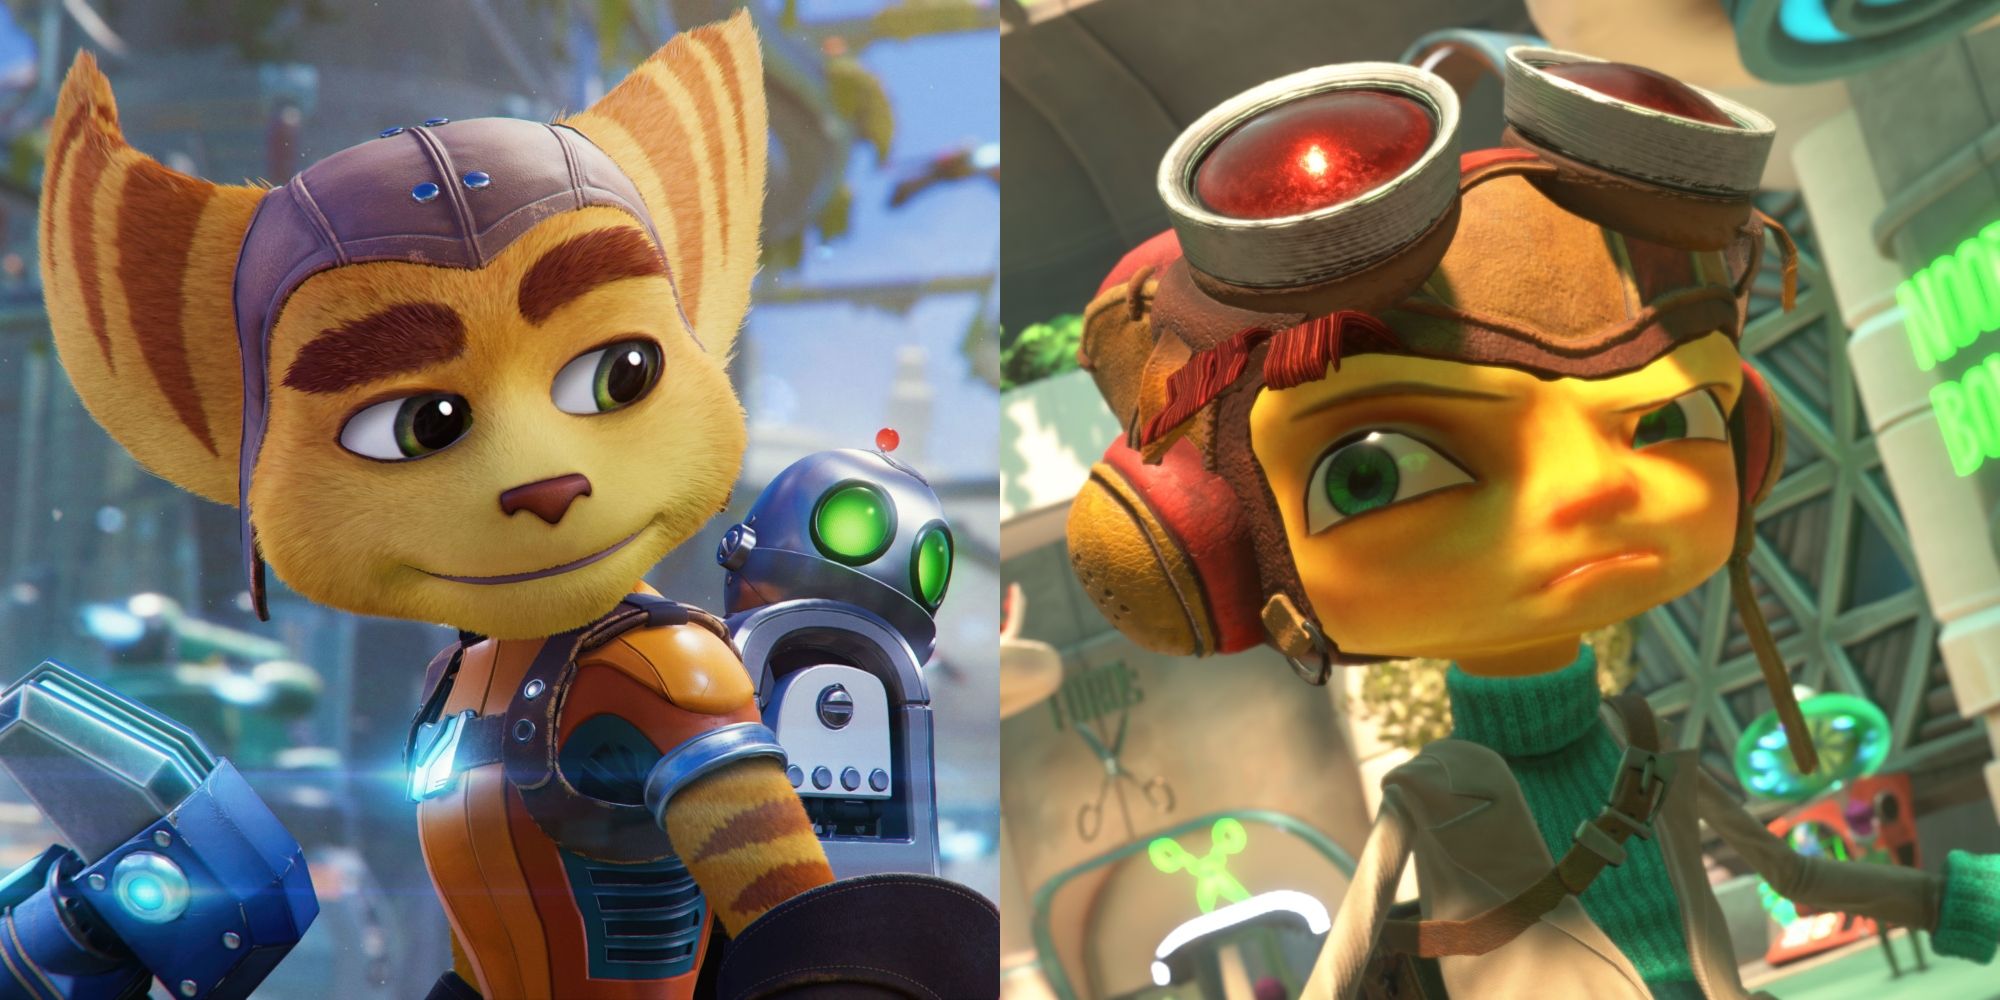 Psychonauts 2 And Ratchet & Clank Show Platformers Are Still Worth Making